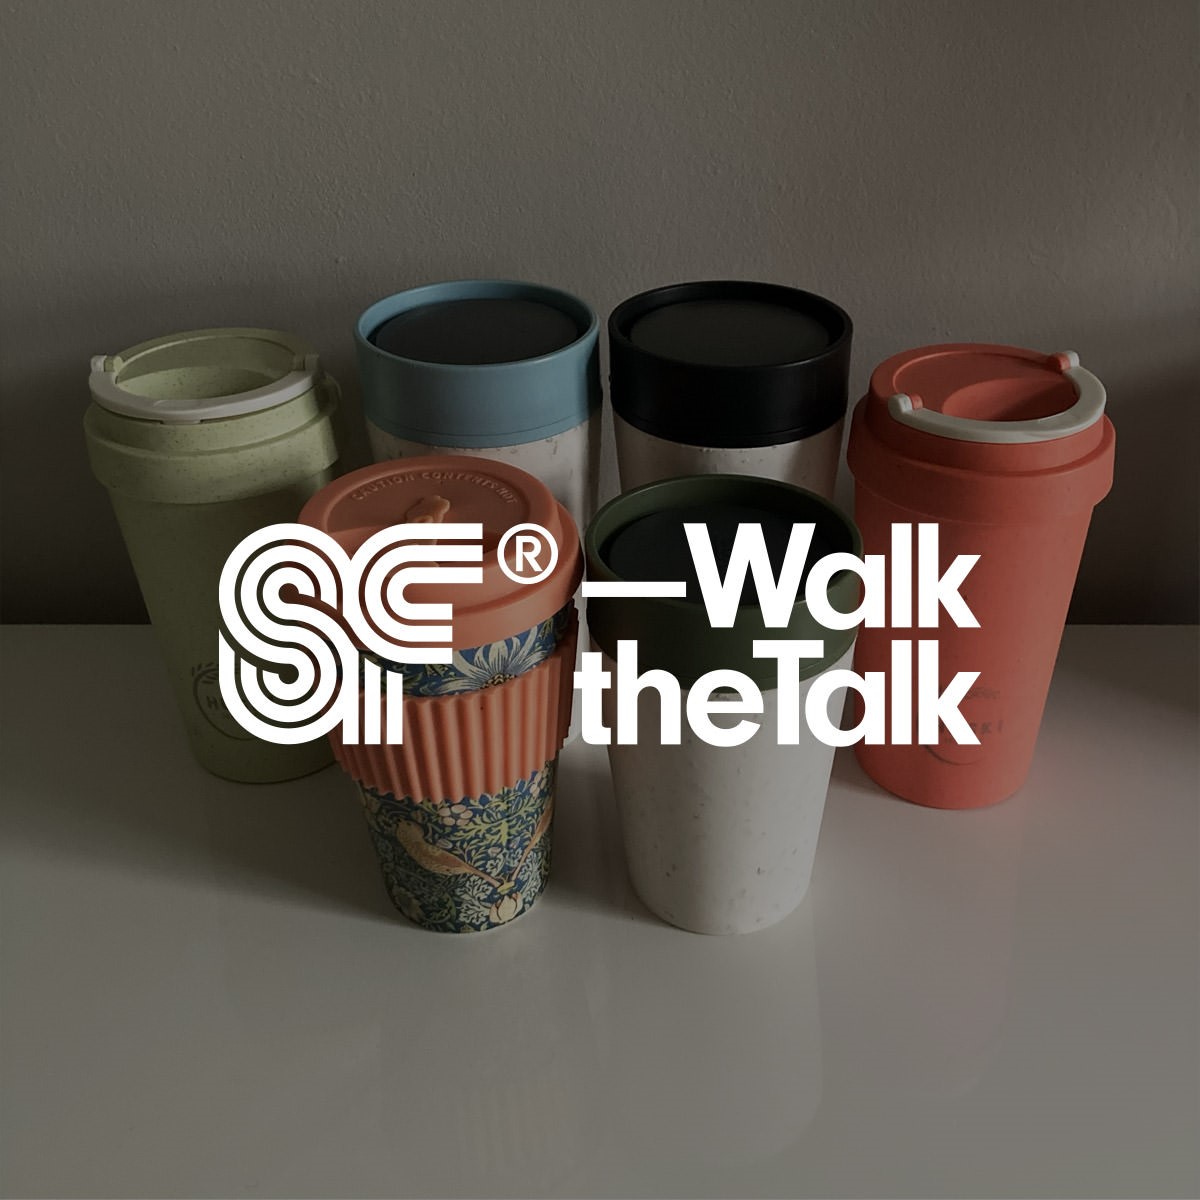 Superfried – Walk the Talk. Testing eco friendly reusable cups – logo. Continuing my path towards eco living.